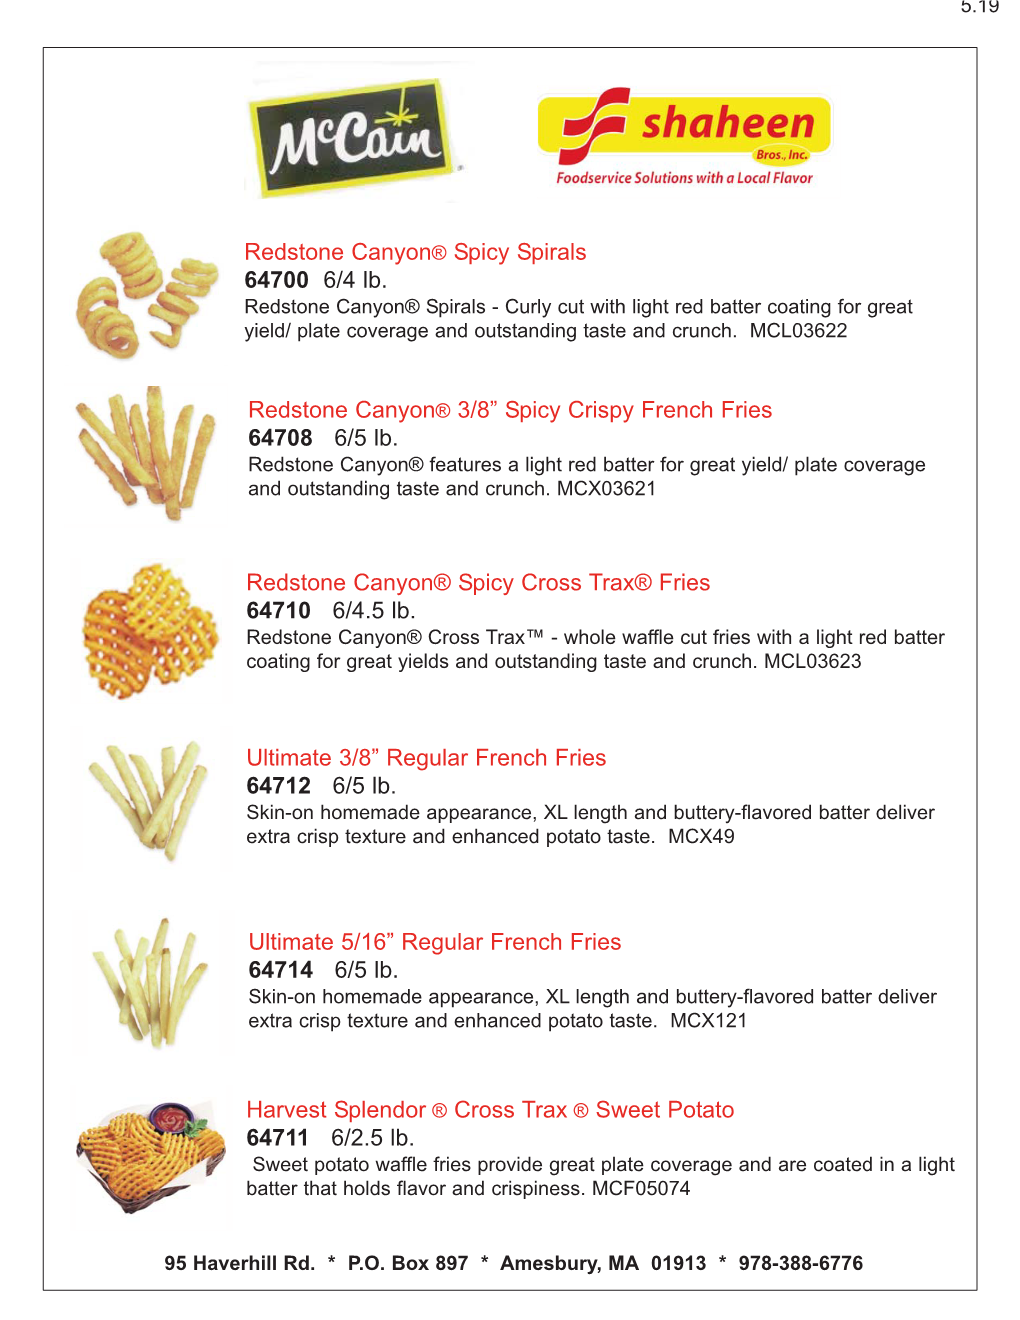 French Fries 64708 6/5 Lb